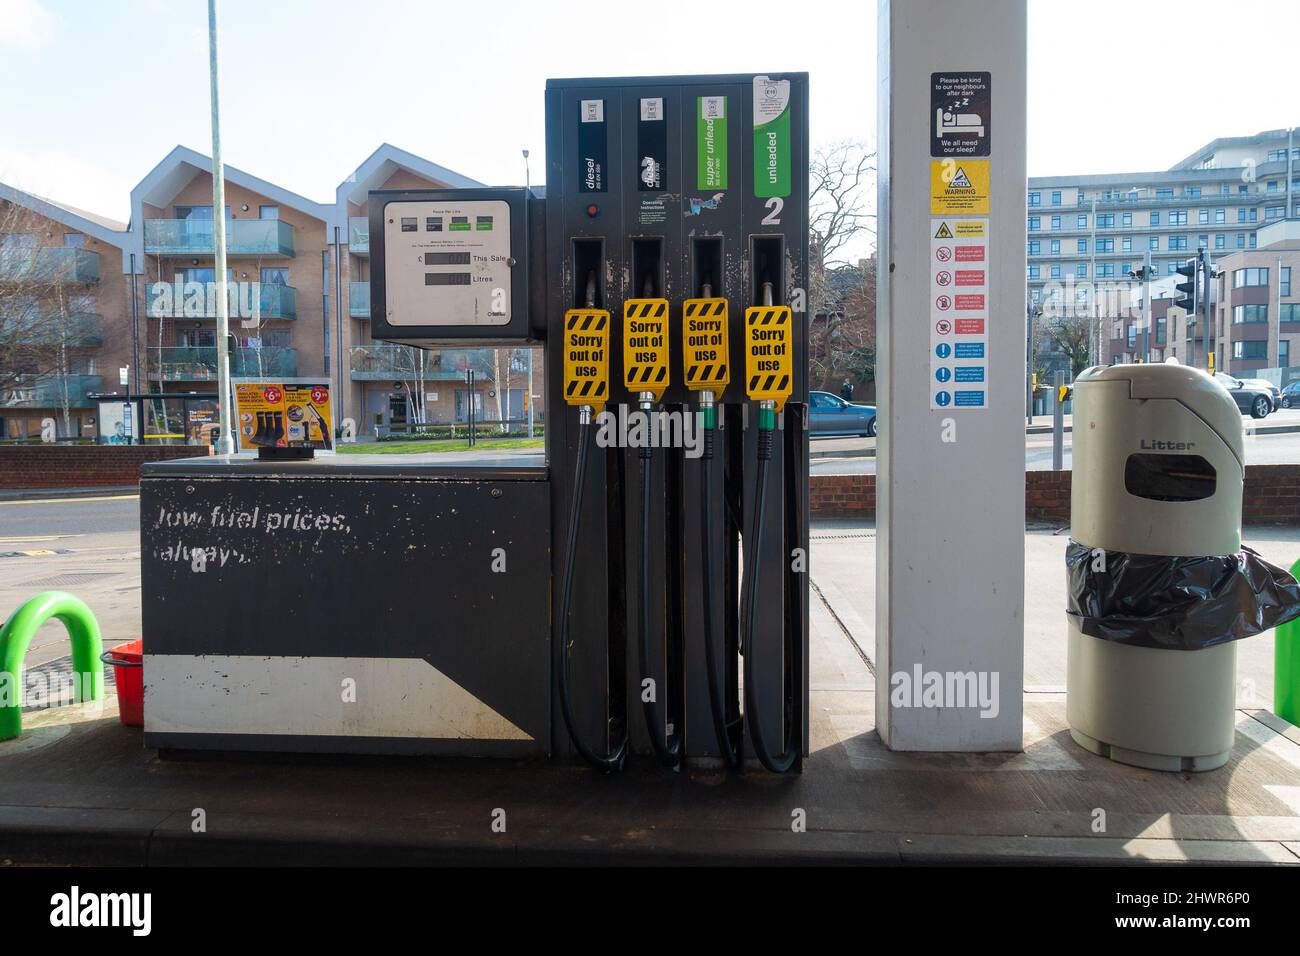 Ashford, Kent, UK. 7th Mar, 2022. A petrol station in Ashford, Kent is now charging over £1.67 per litre of diesel as a barrel of oil hits $130. This petrol station has short supply of fuel. Photo Credit: Paul Lawrenson-PAL News/Alamy Live News Stock Photo